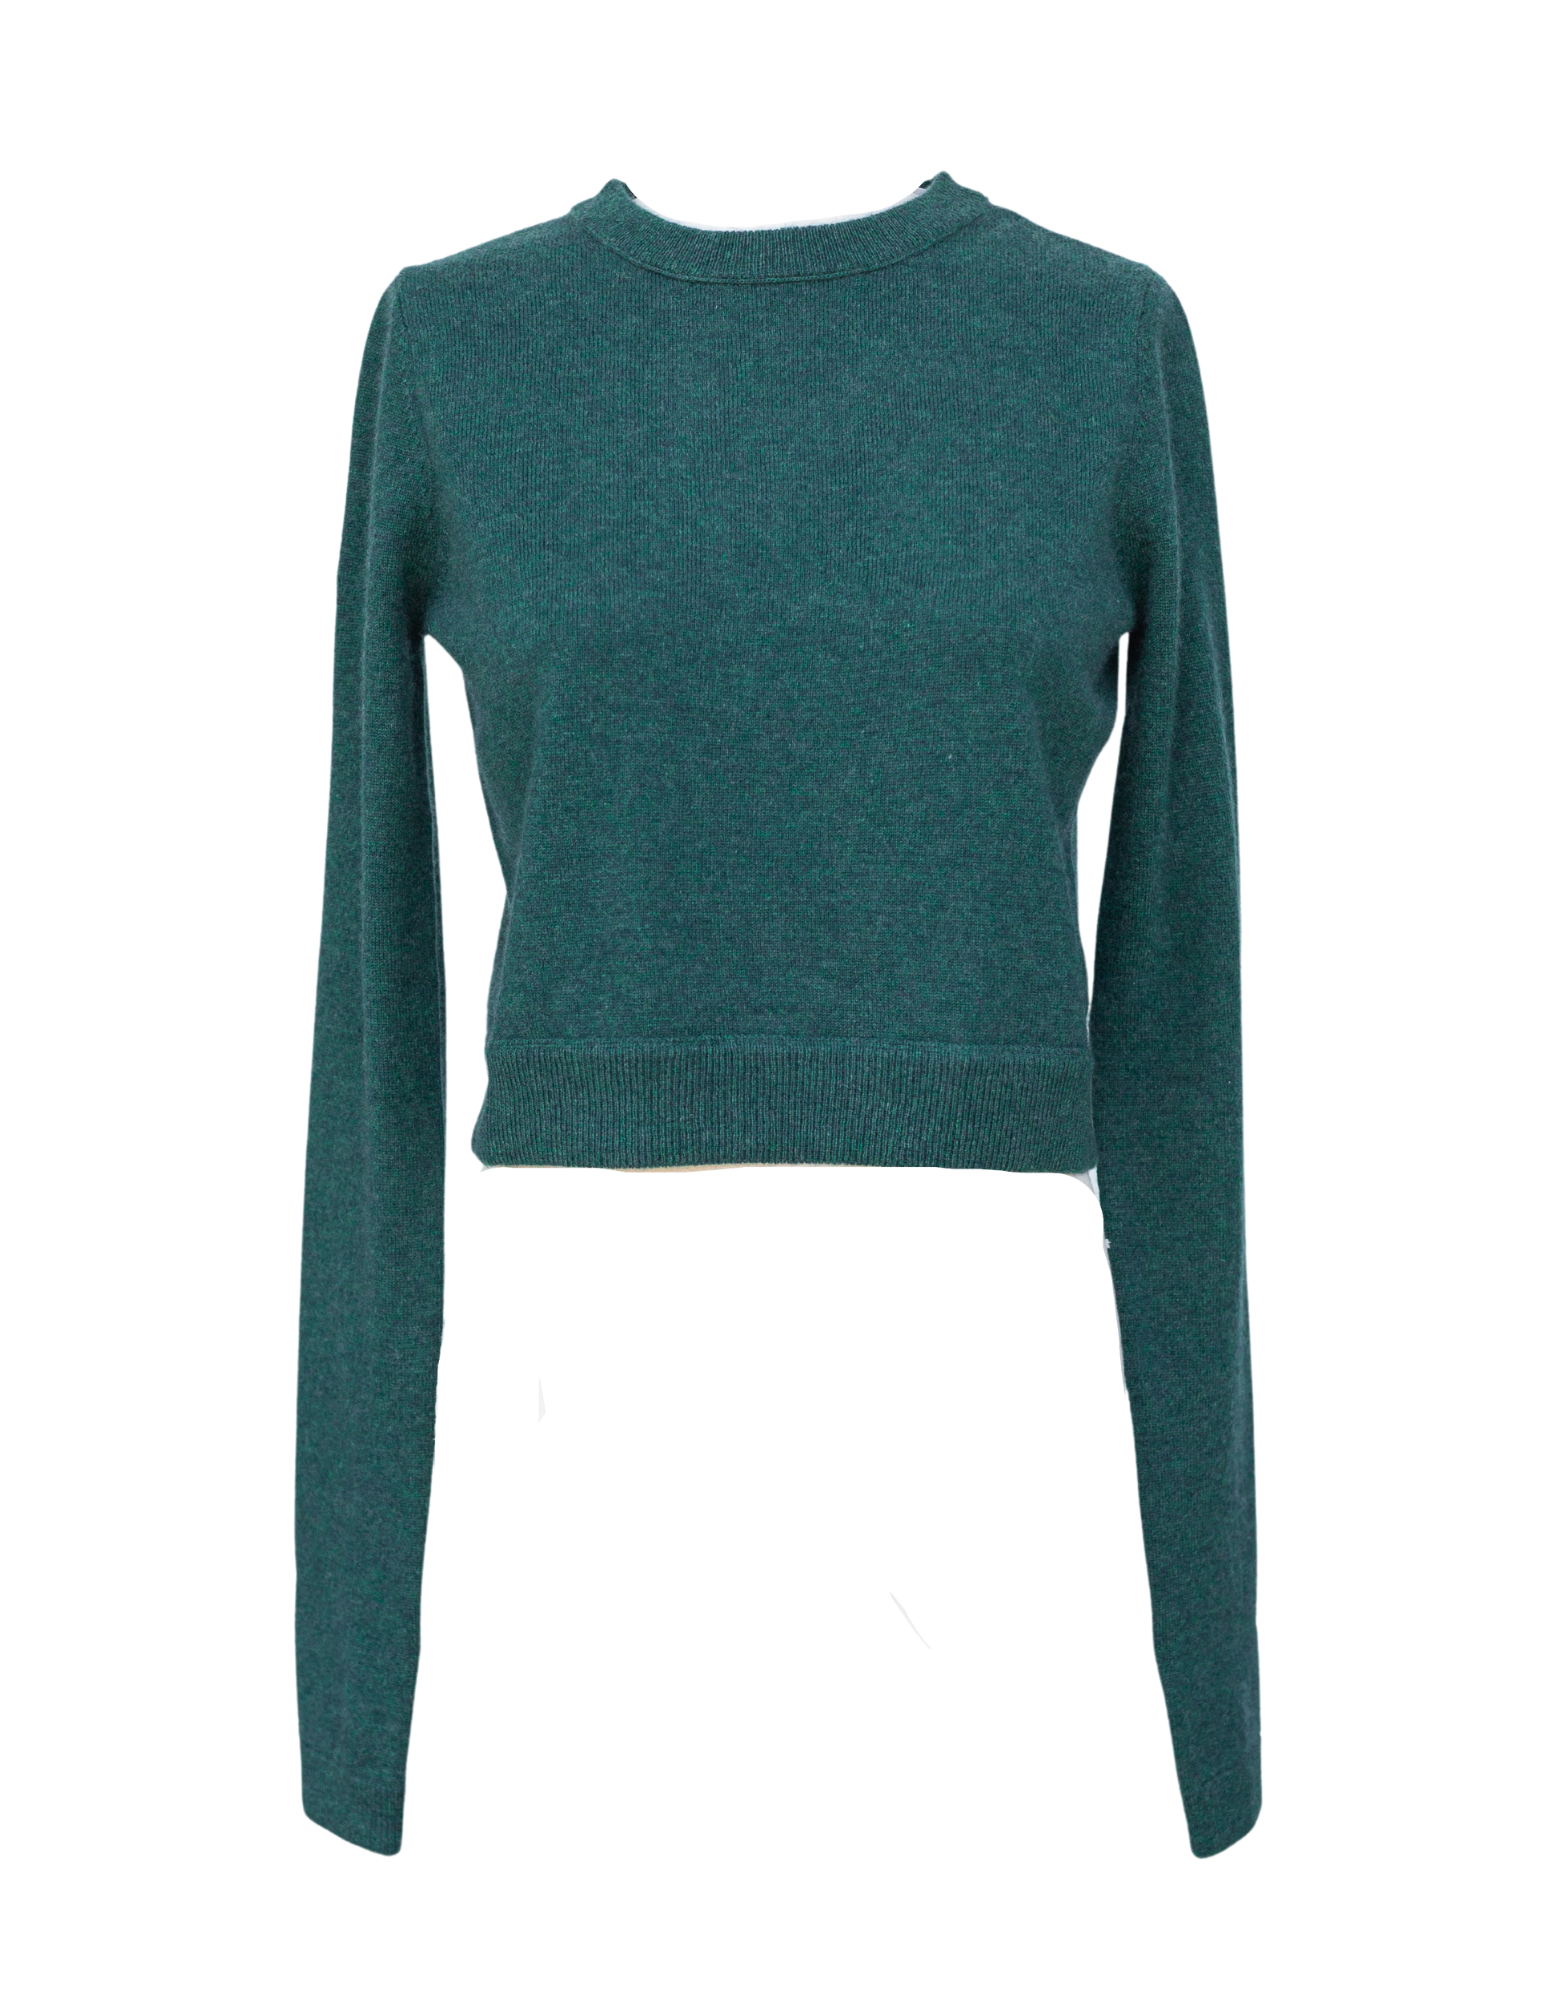 All Thumbs Sweater - Emerald